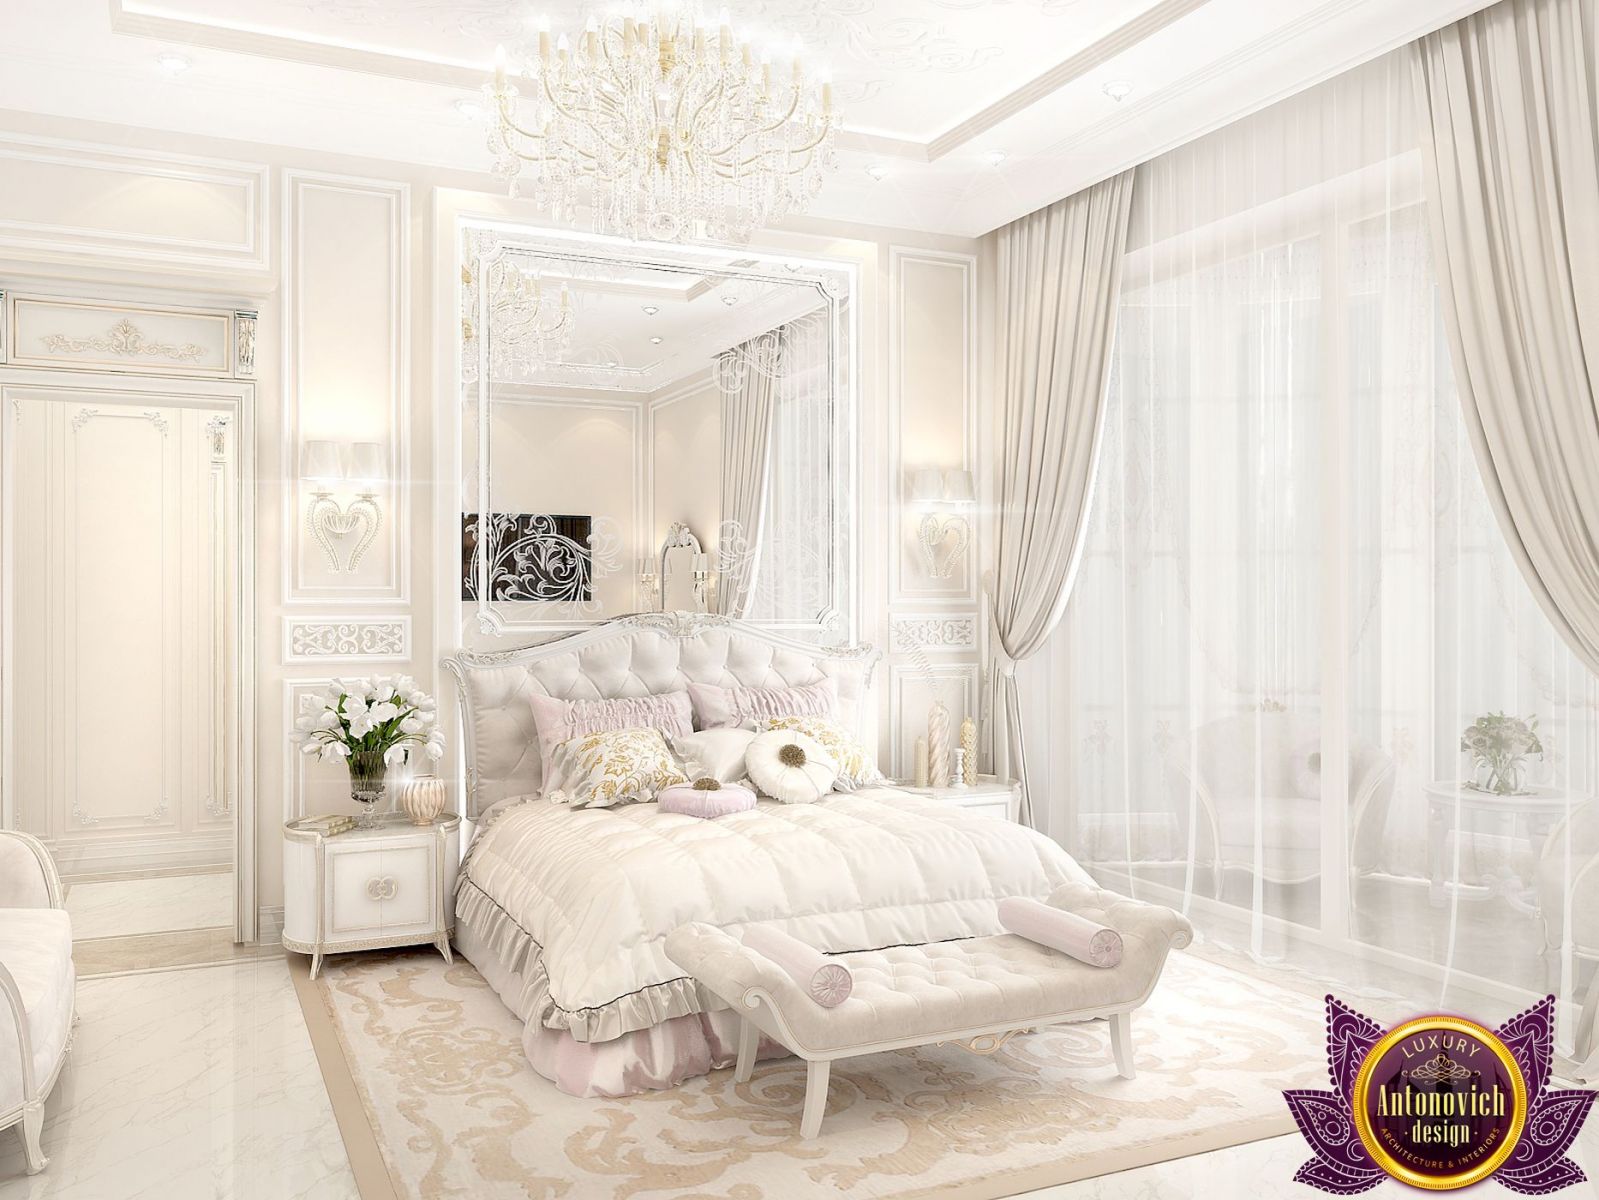 Opulent bedding and pillows in a classic bedroom design